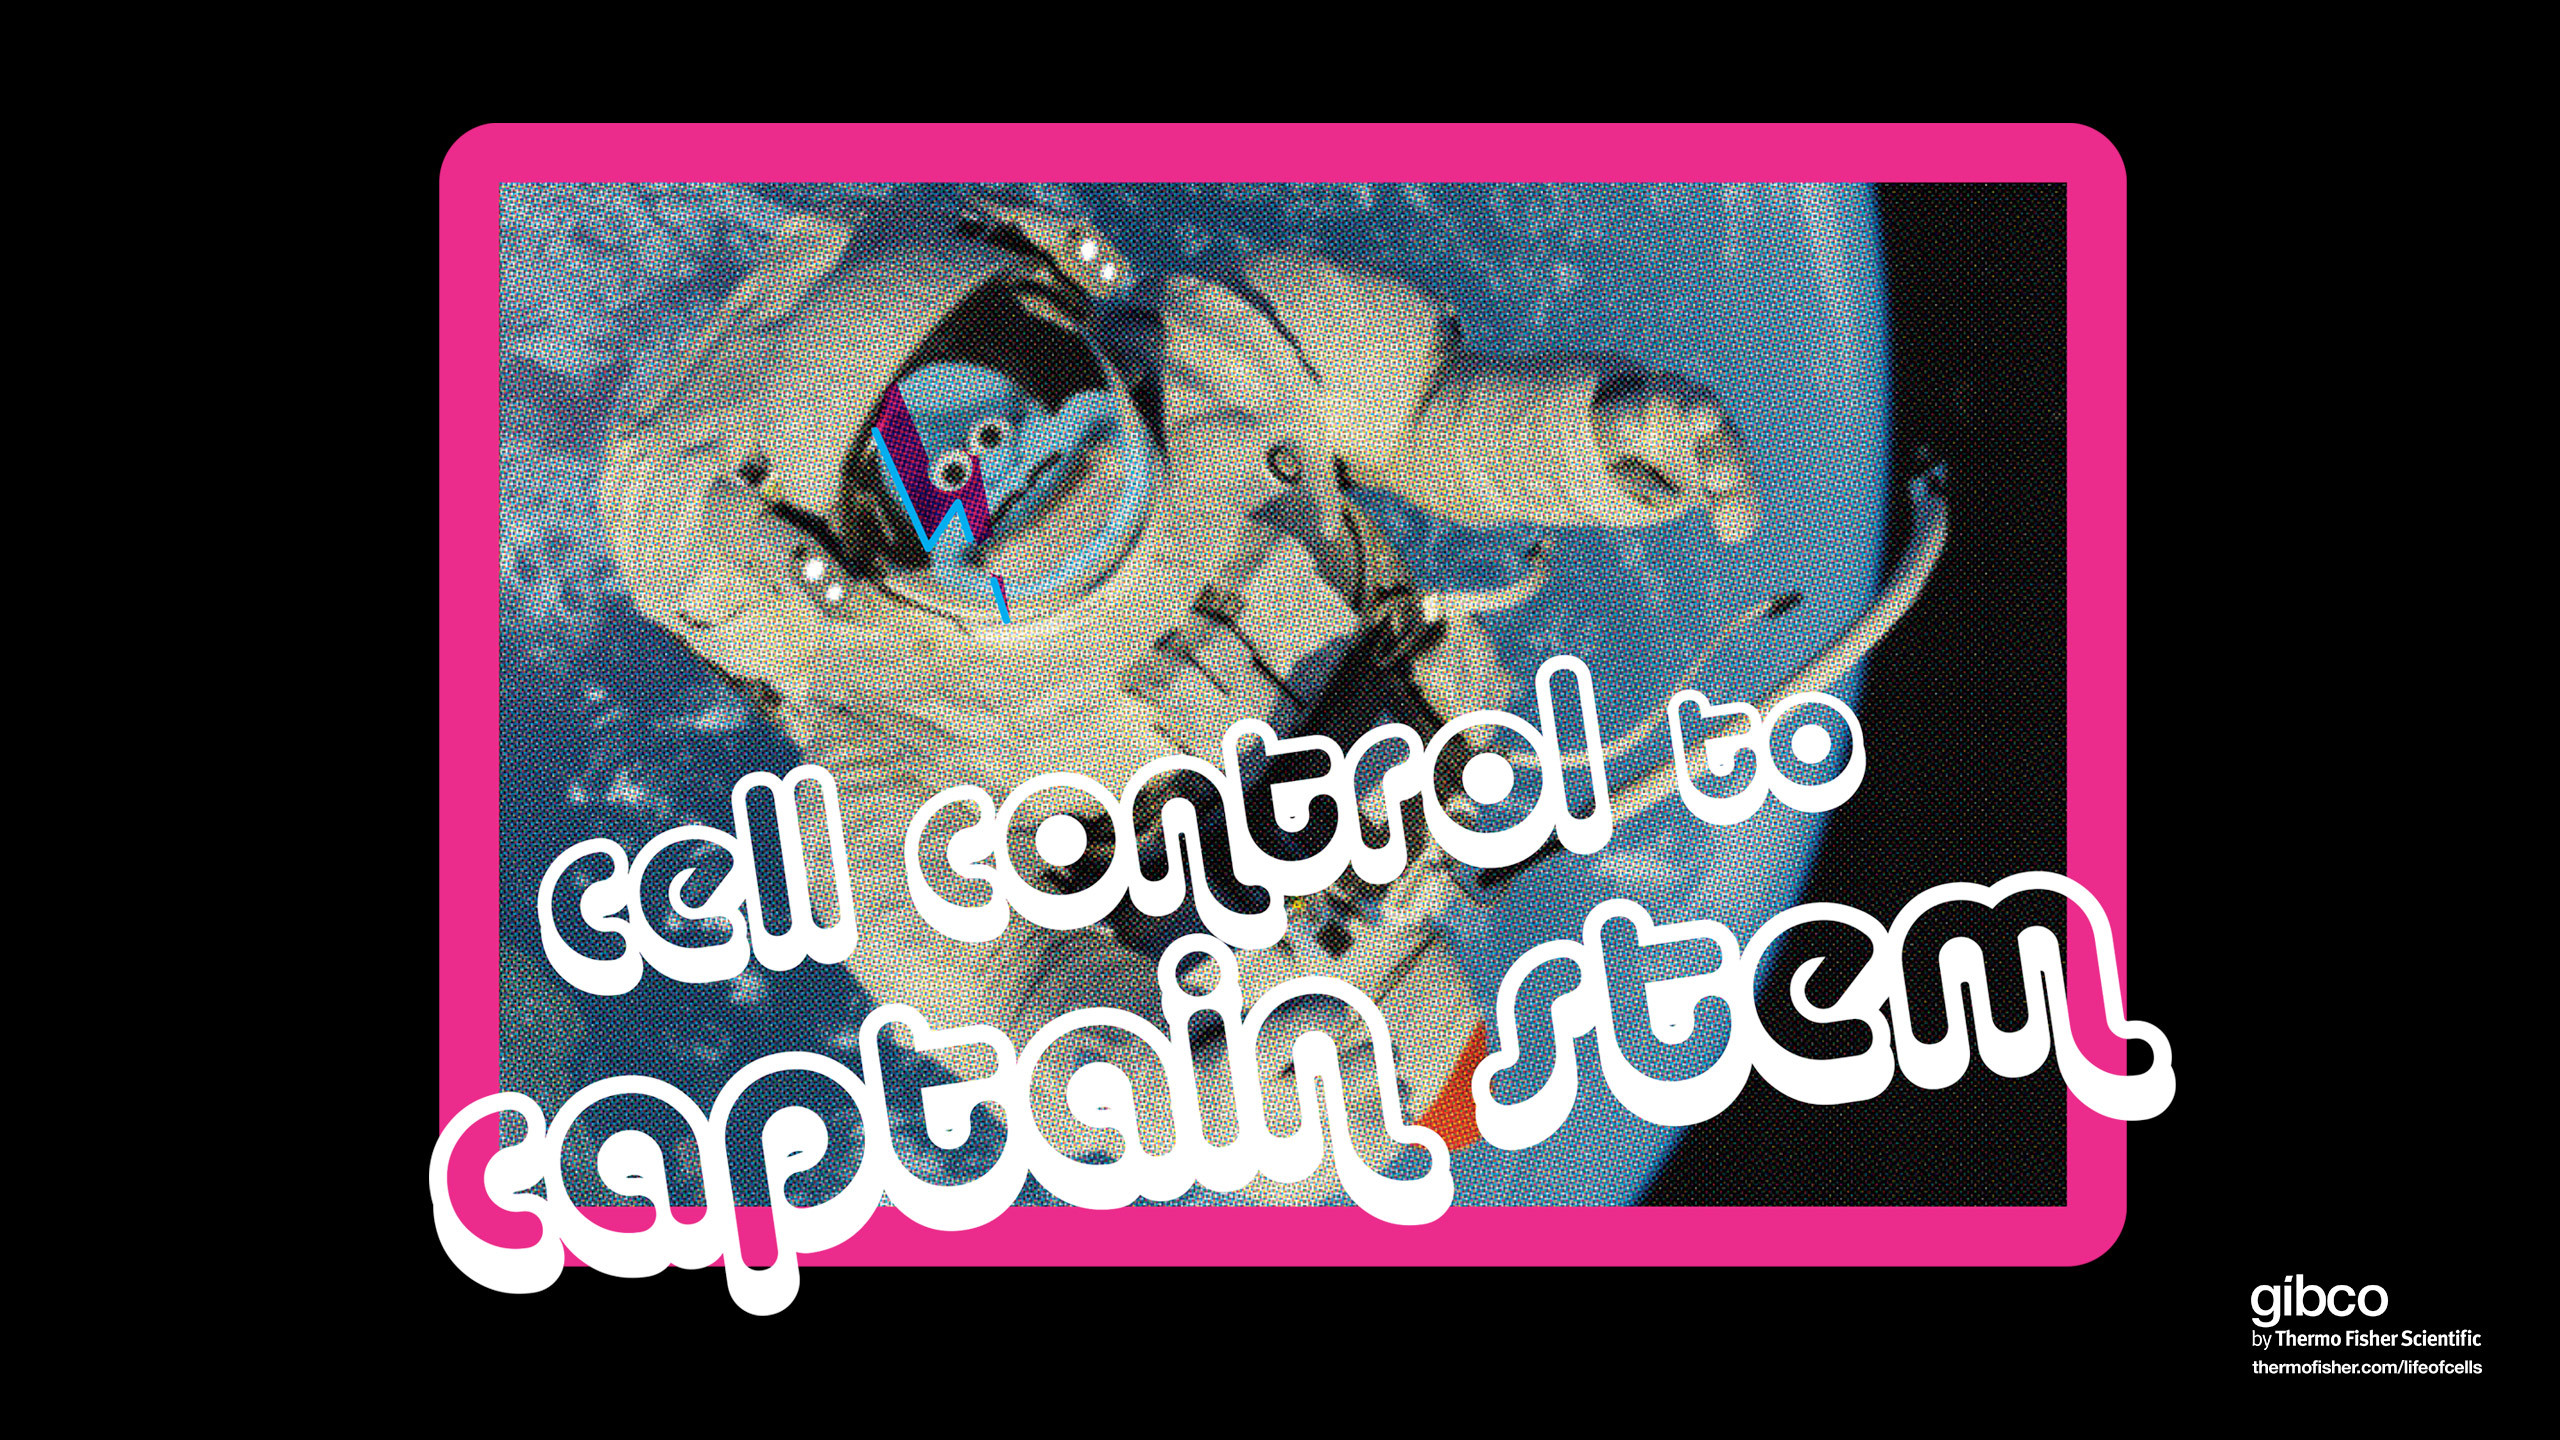 2560x1440 "Cell Crontrol to Captain Stem" Download wallpaper (Hi-res px)